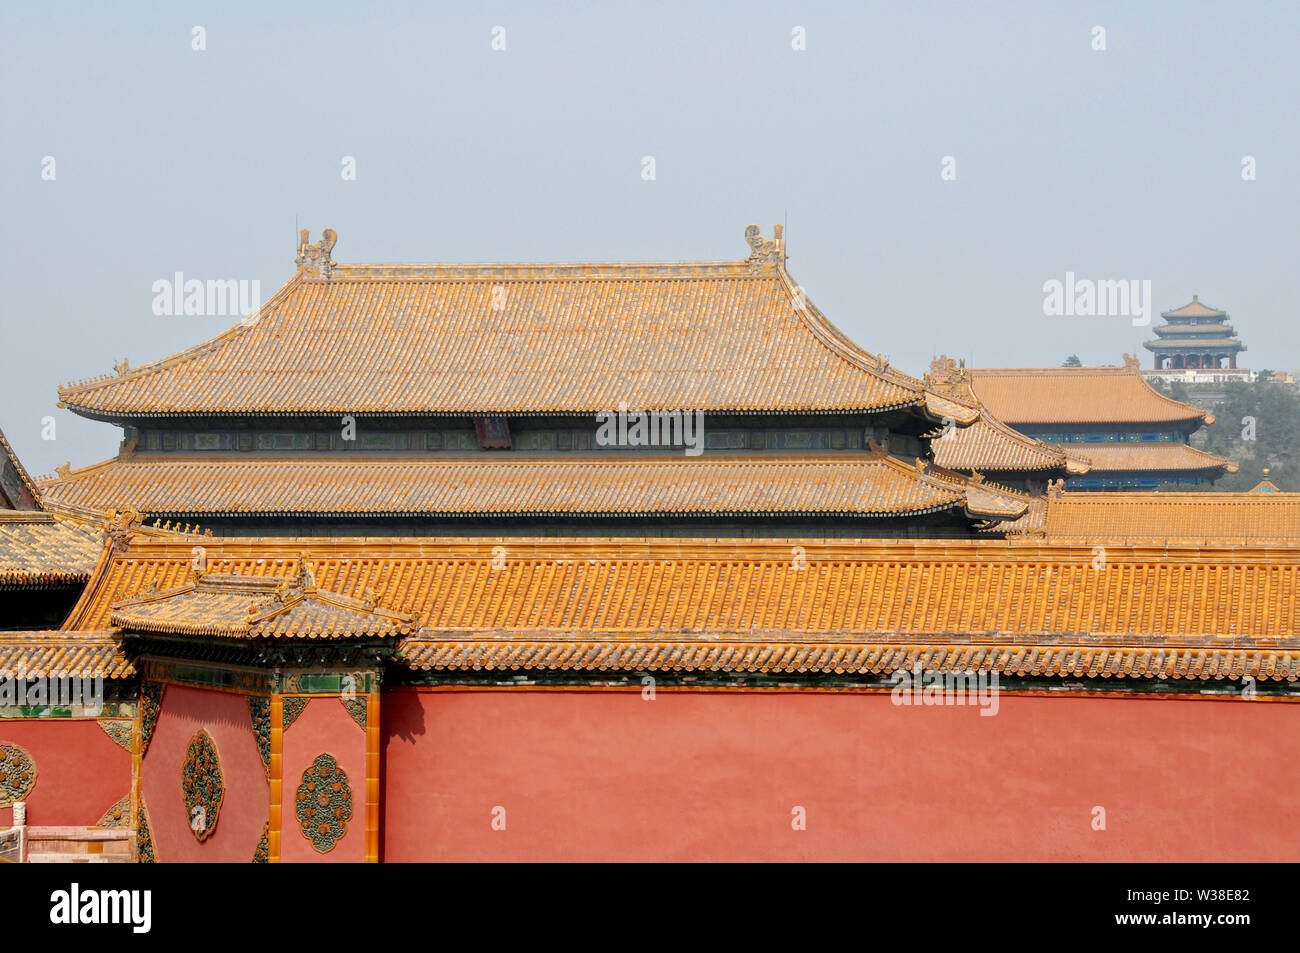 Forbidden City, Beijing, China. Red walls and yellow roofs of the Forbidden City. The Forbidden City has traditional Chinese architecture. UNESCO. Stock Photo